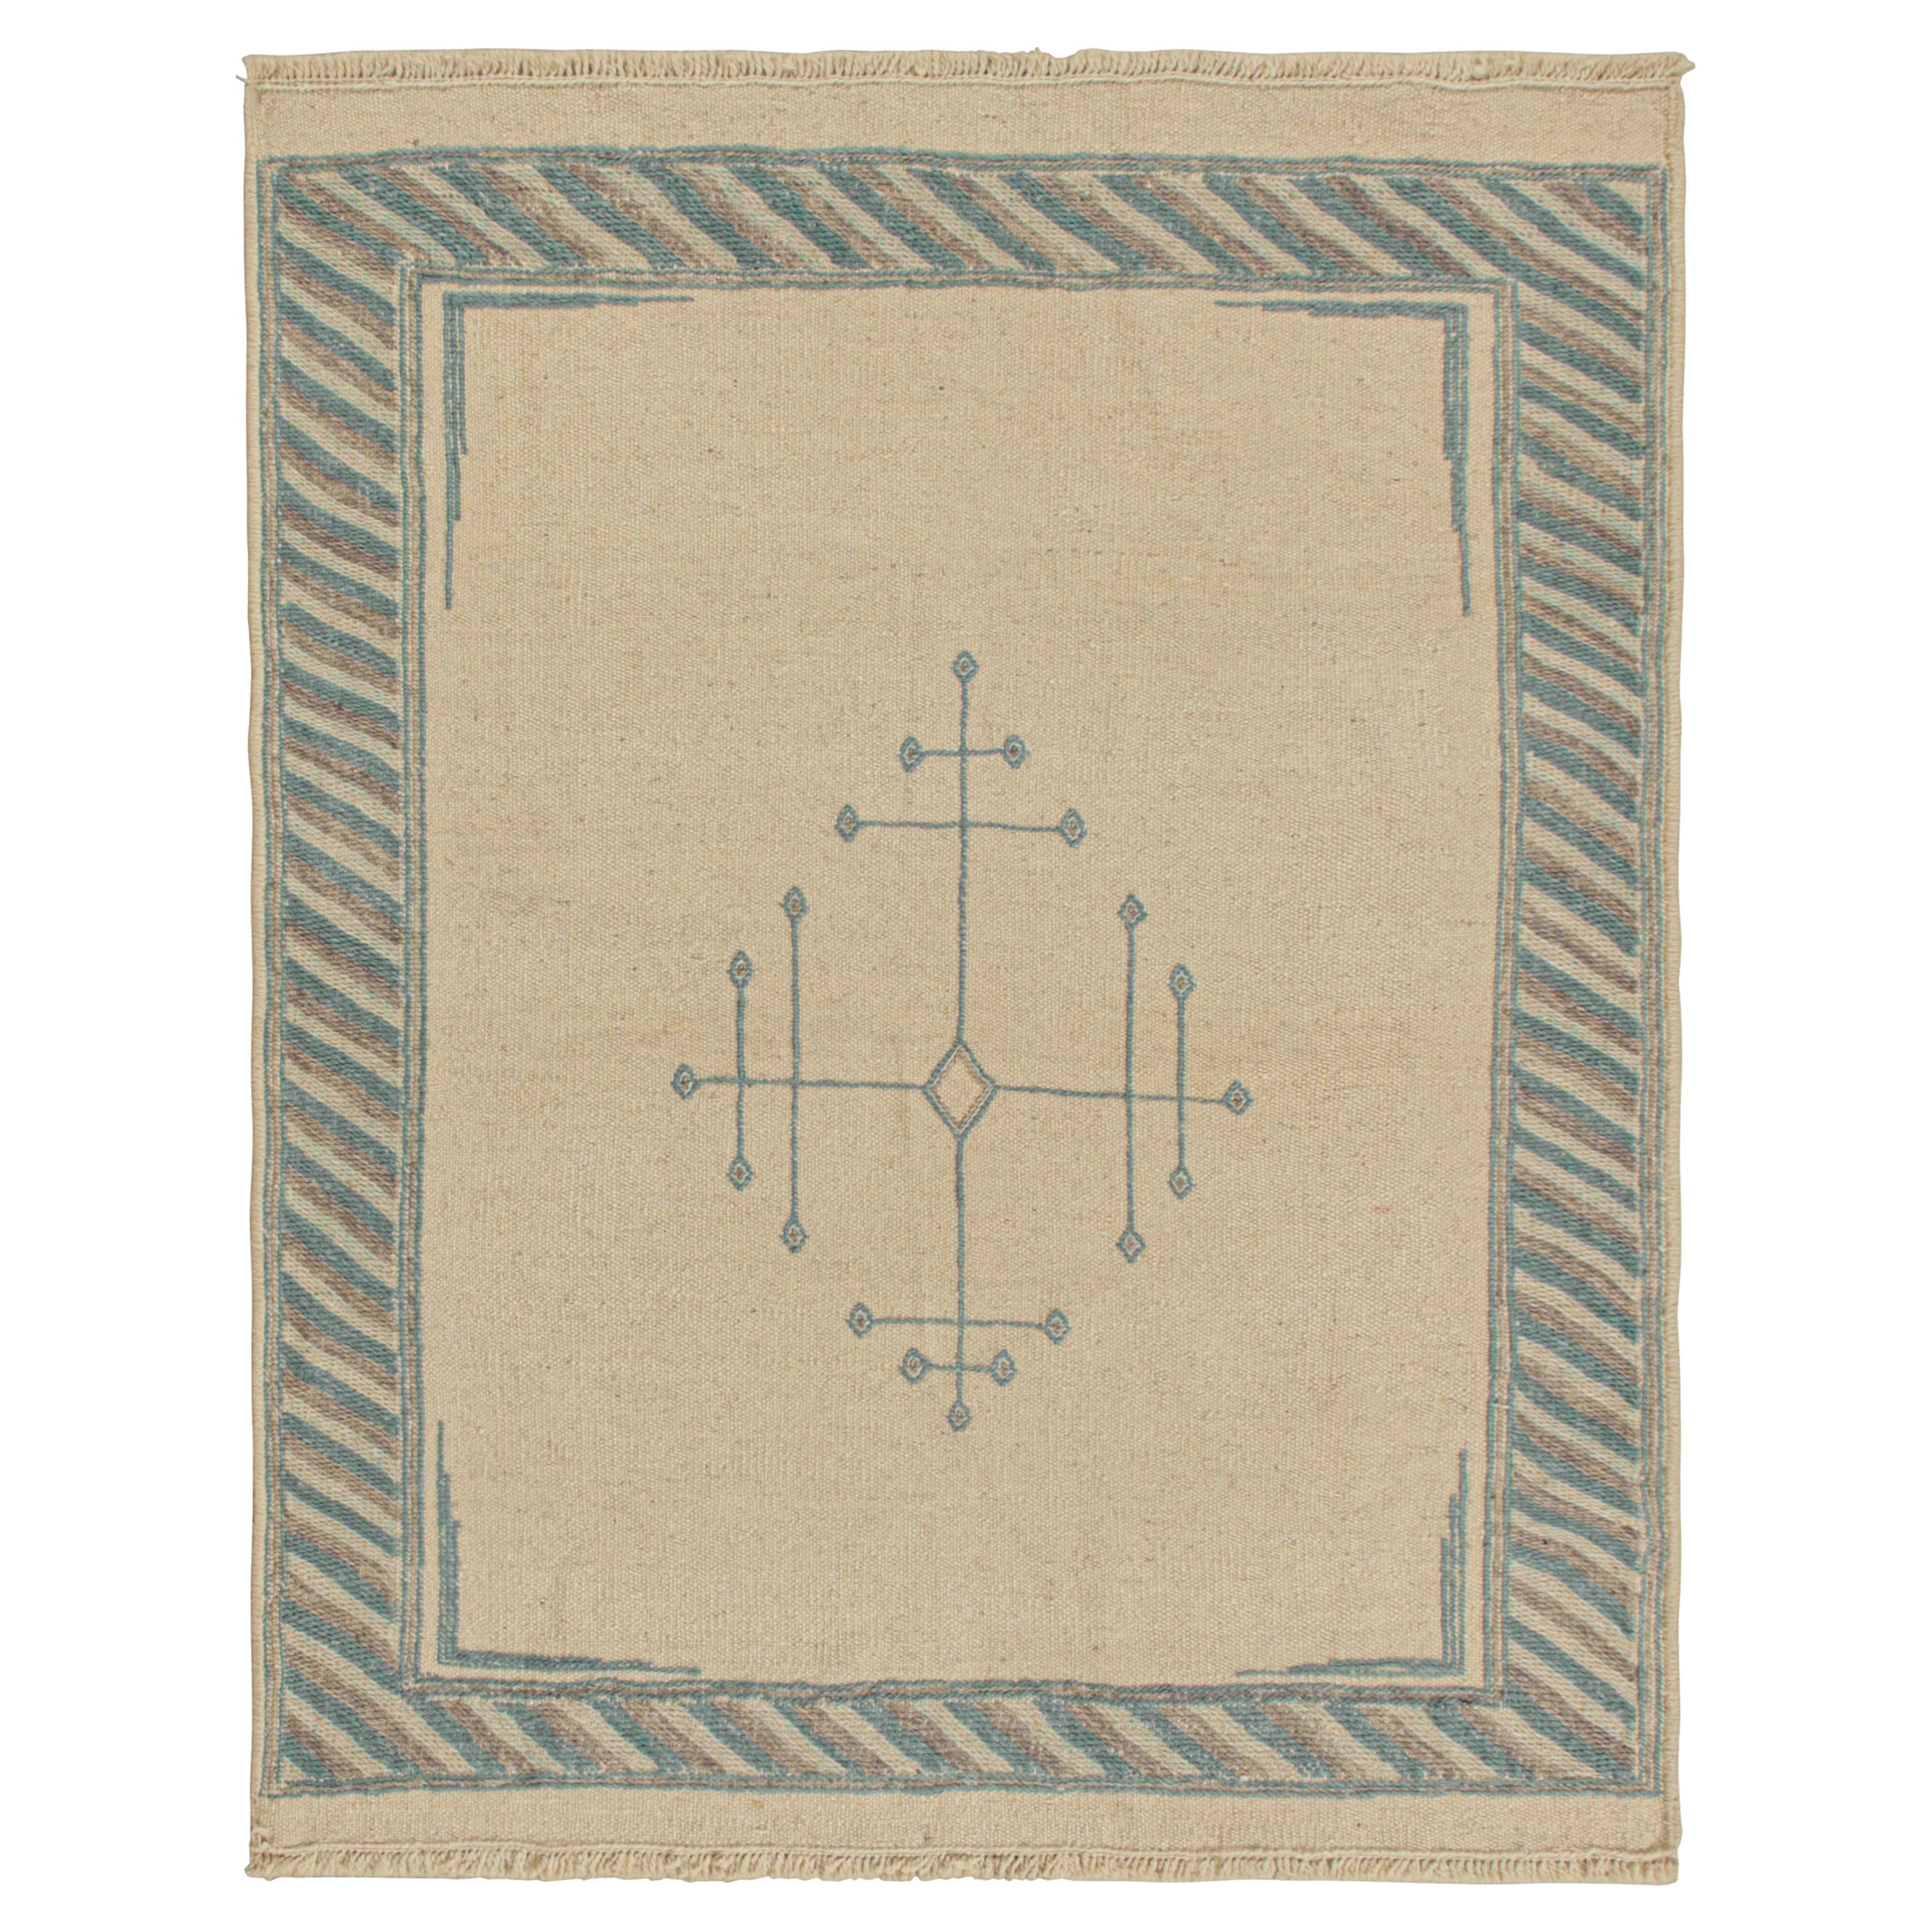 Rug & Kilim’s Sofreh-Style Persian Kilim in Beige with Blue Medallion